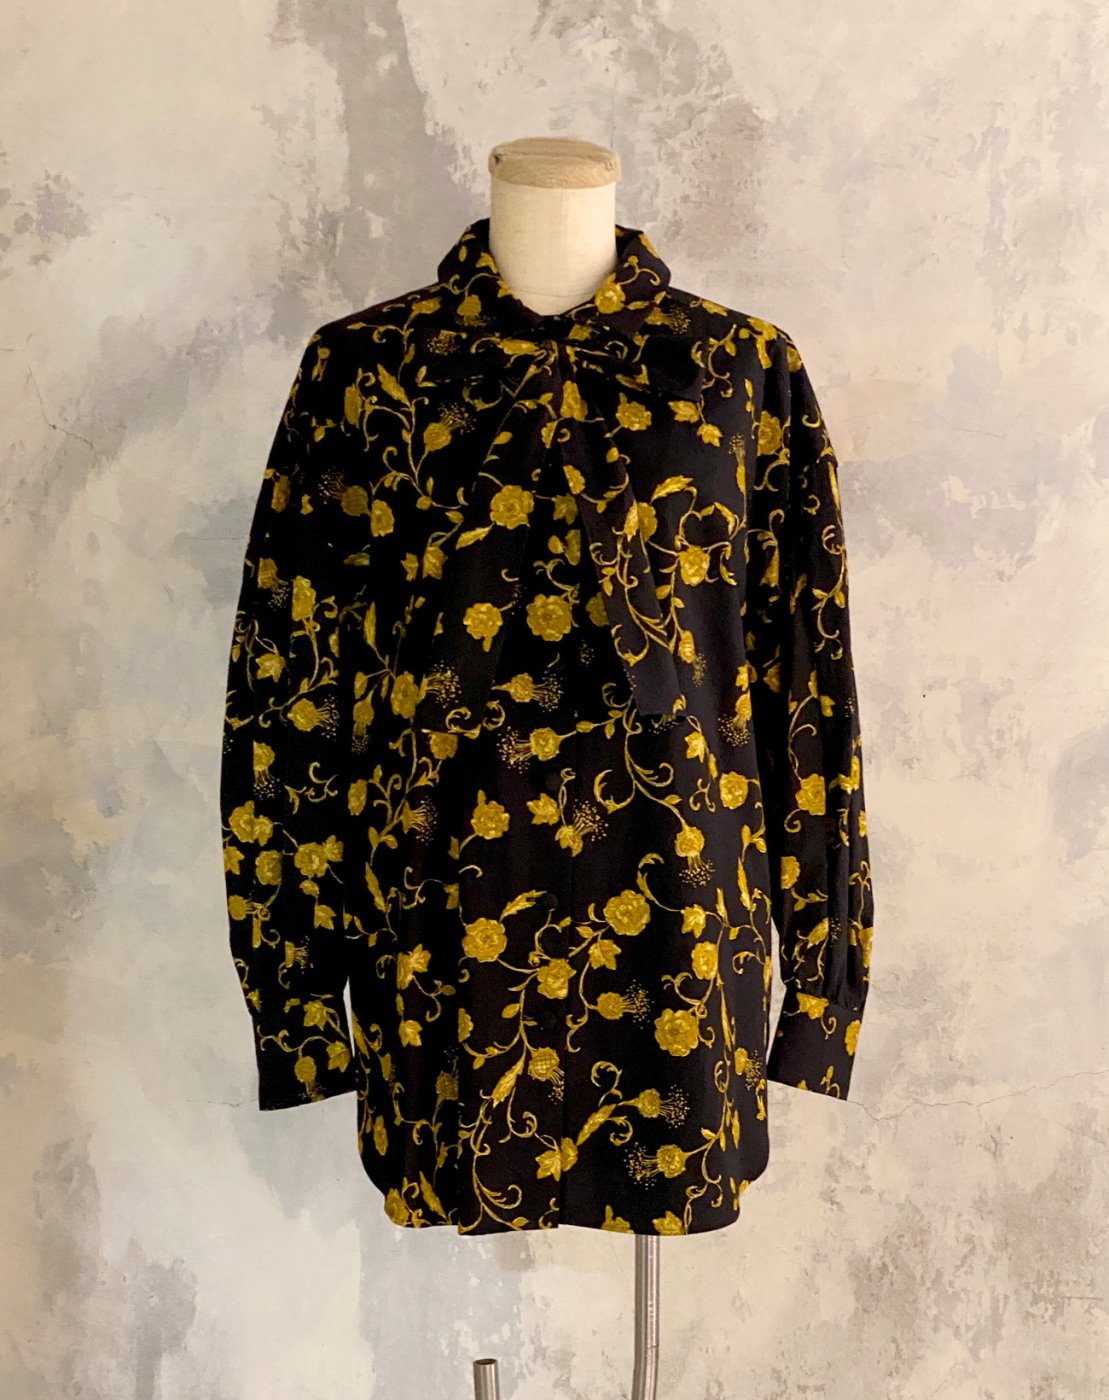 leur logette - <img class='new_mark_img1' src='https://img.shop-pro.jp/img/new/icons2.gif' style='border:none;display:inline;margin:0px;padding:0px;width:auto;' />Royal Flower Print Bowtie Blouse - Black